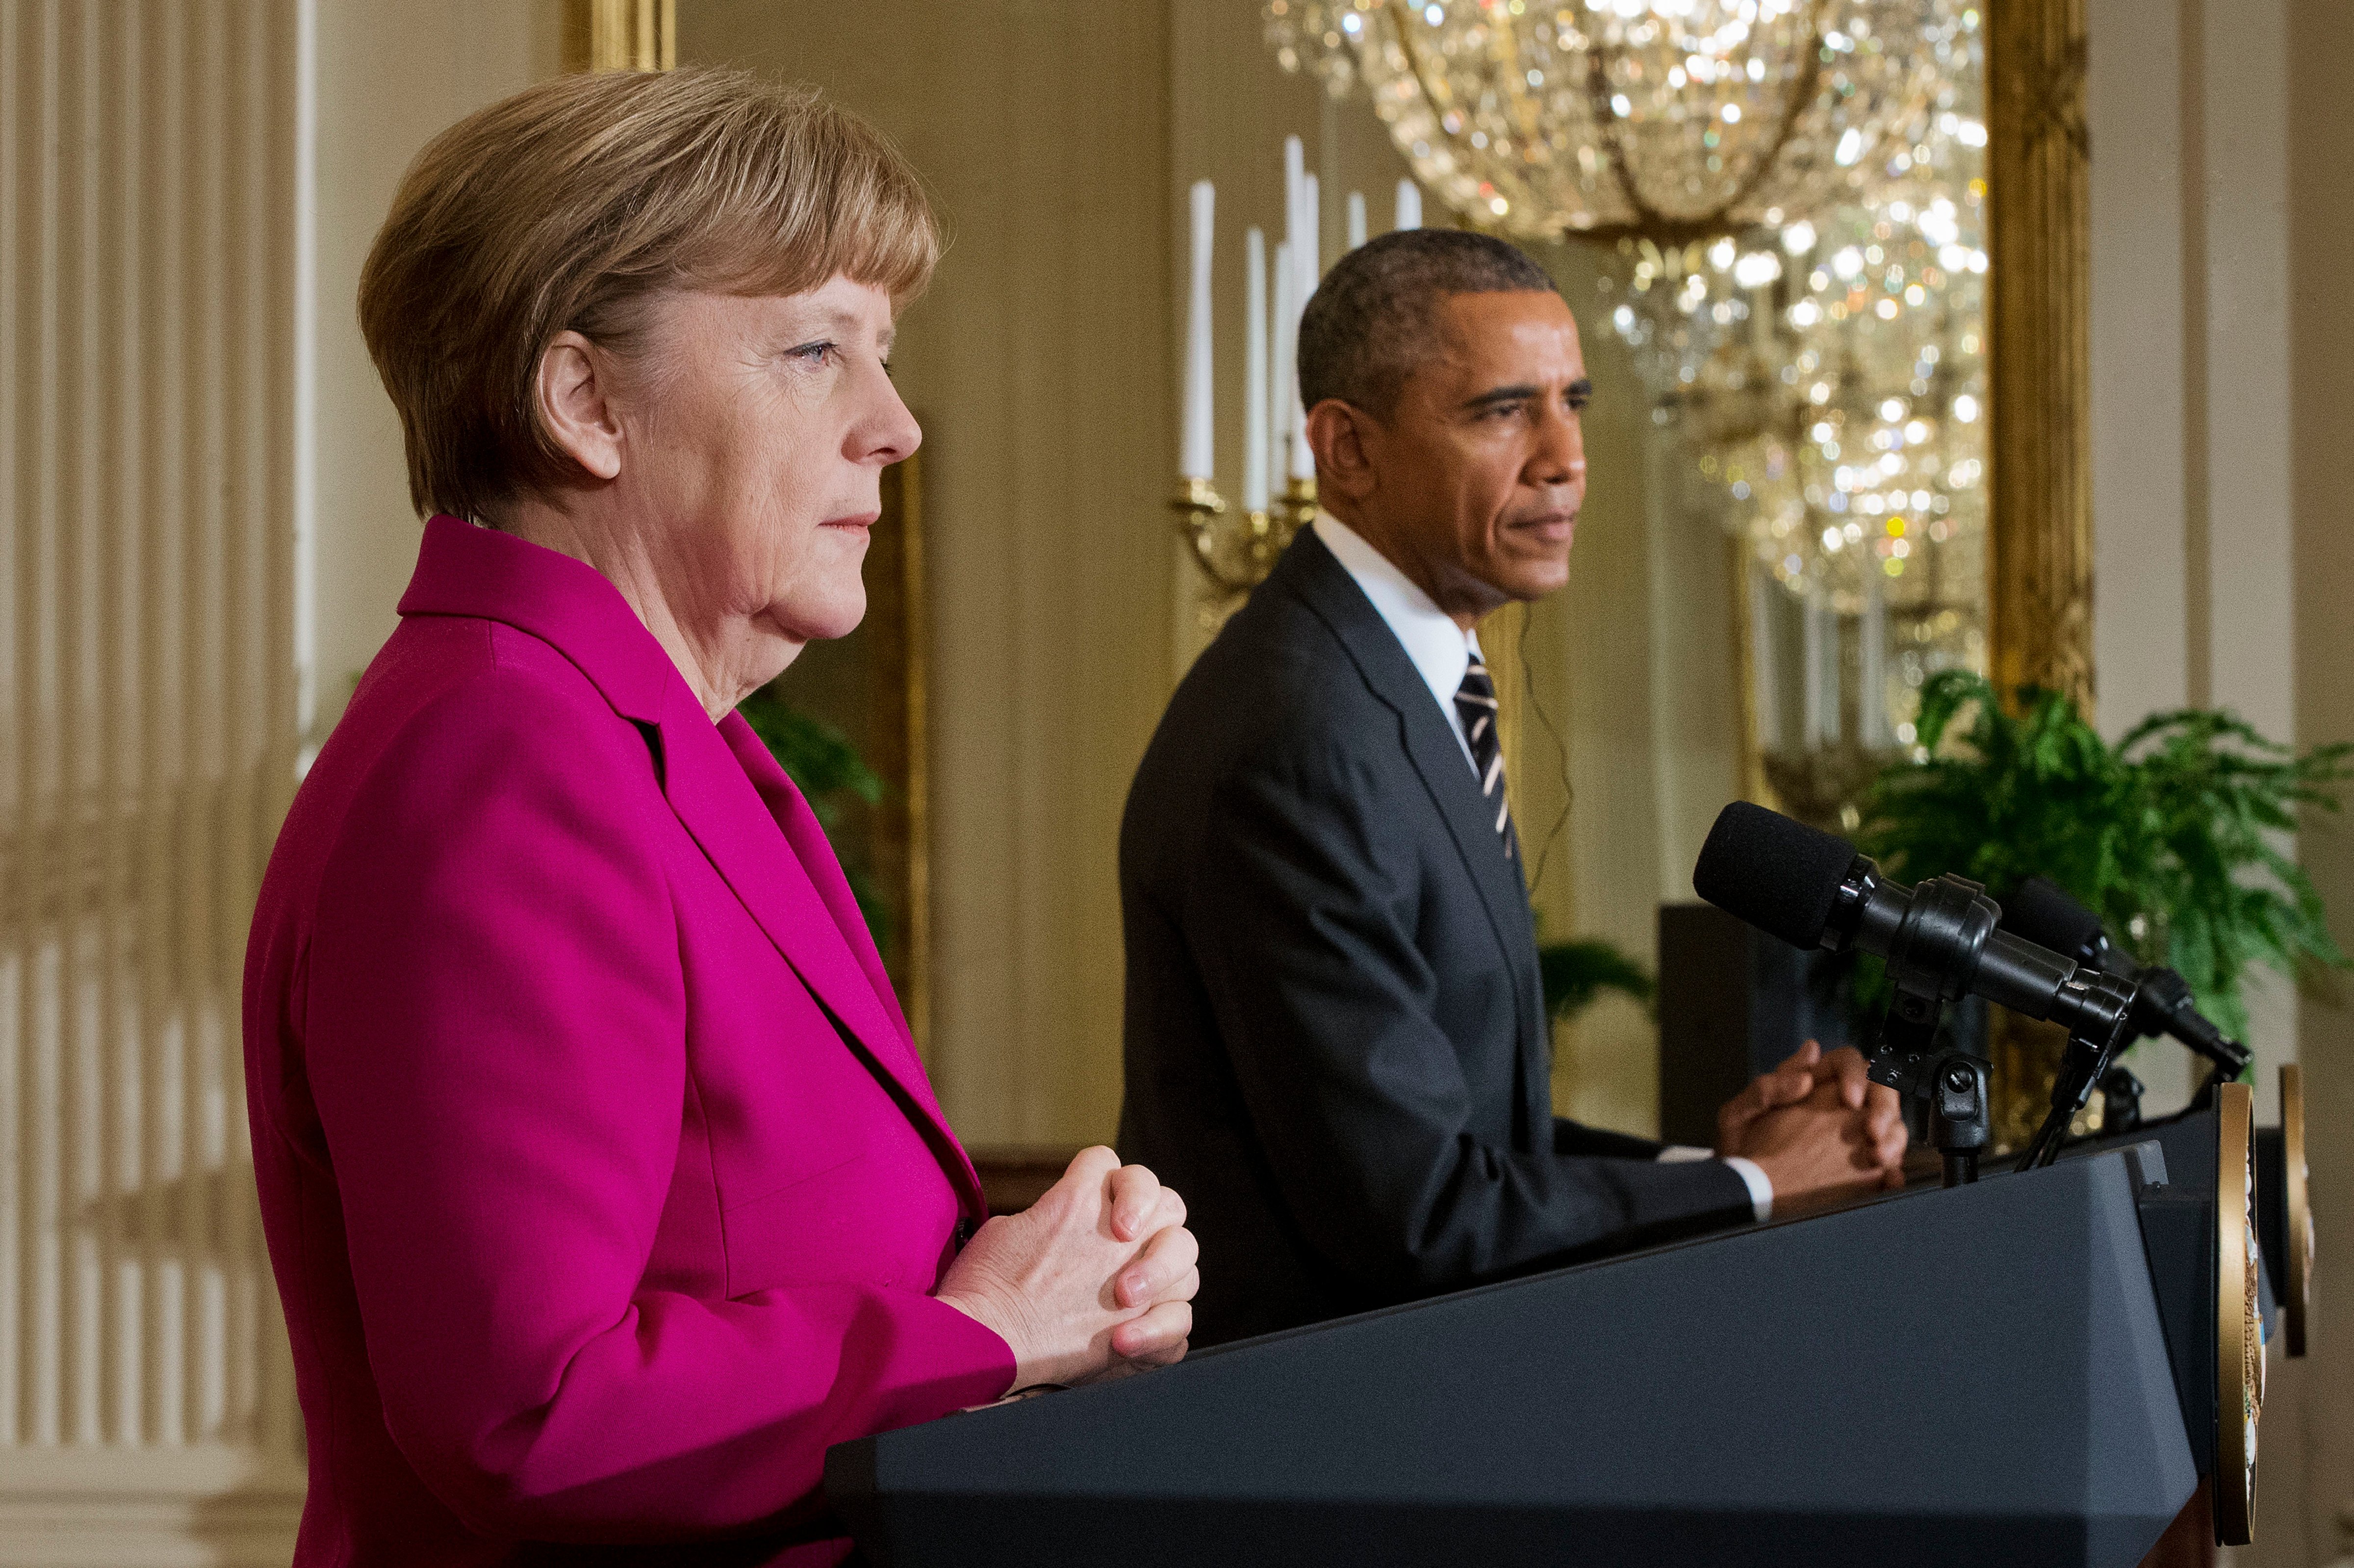 U.S. President Barack Obama and German Chancellor Angela Merkel during their joint news conference in the East Room of the White House in Washington on Feb. 9, 2015 (Pablo Martinez Monsivais—AP)